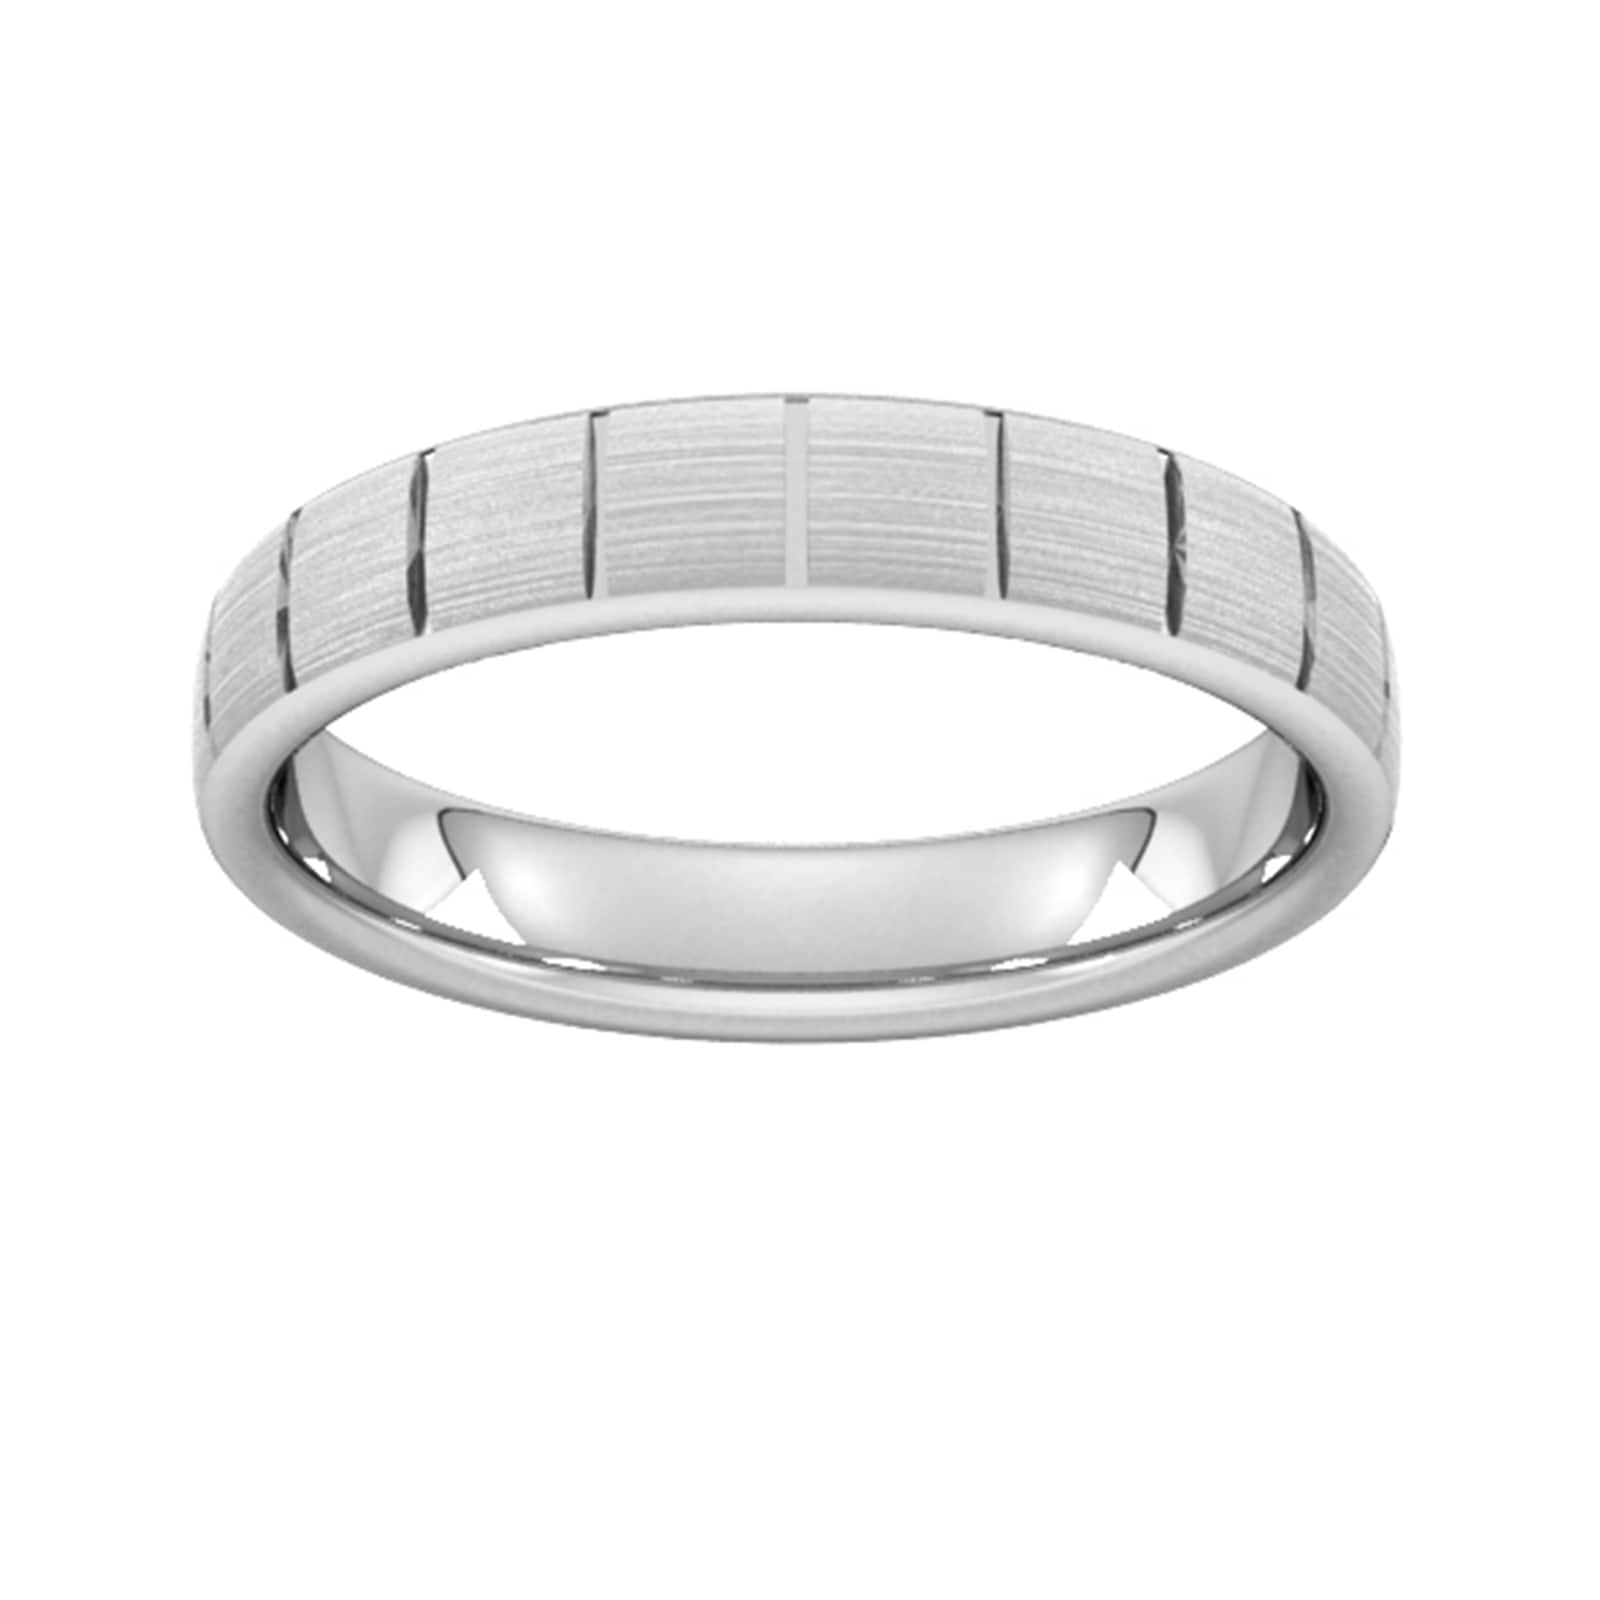 4mm Traditional Court Heavy Vertical Lines Wedding Ring In 9 Carat White Gold - Ring Size U